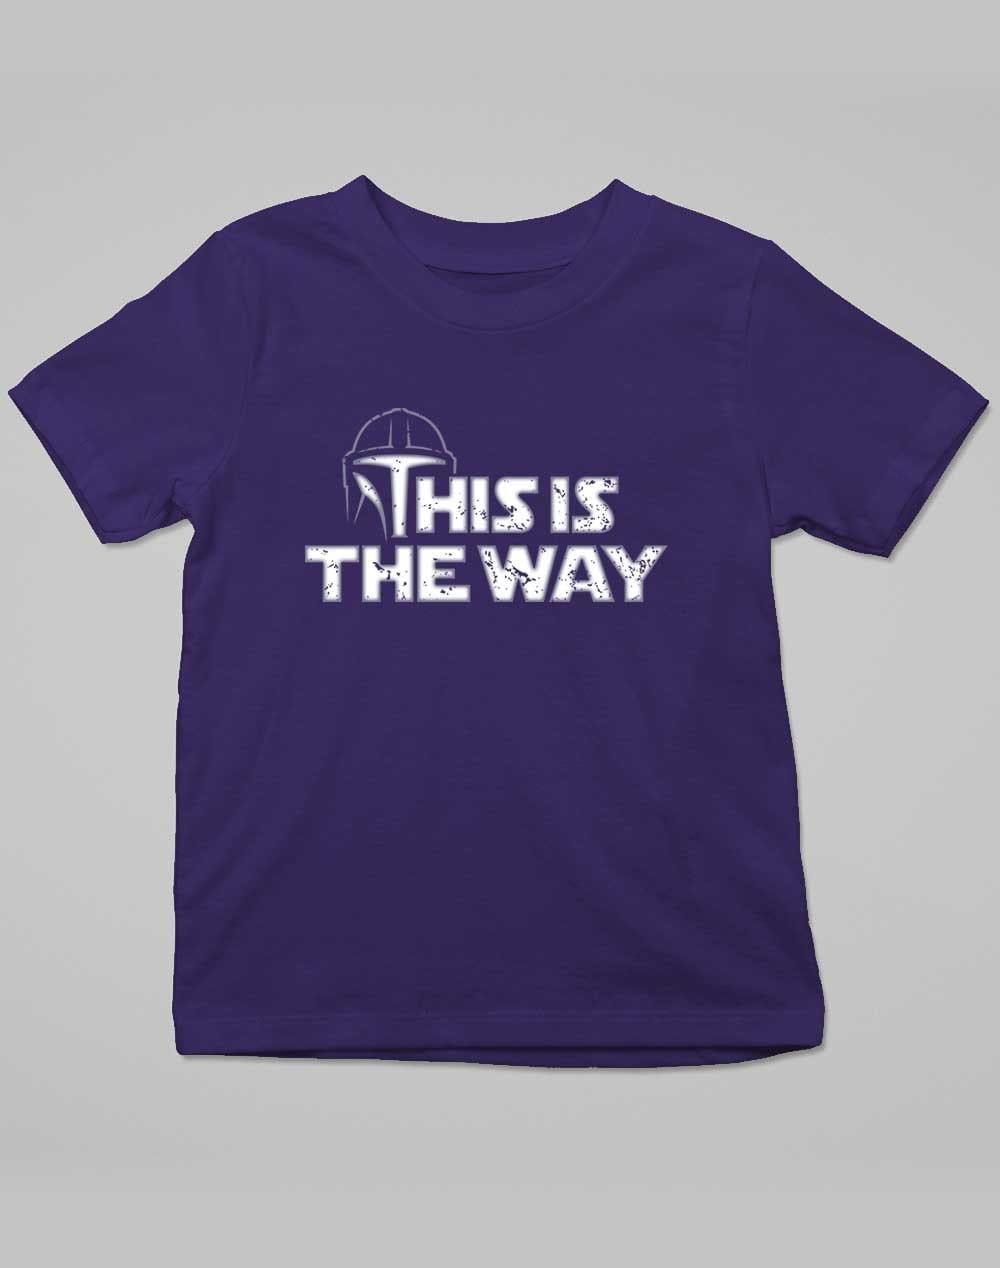 This is the Way - Kids T-Shirt 3-4 years / Navy  - Off World Tees